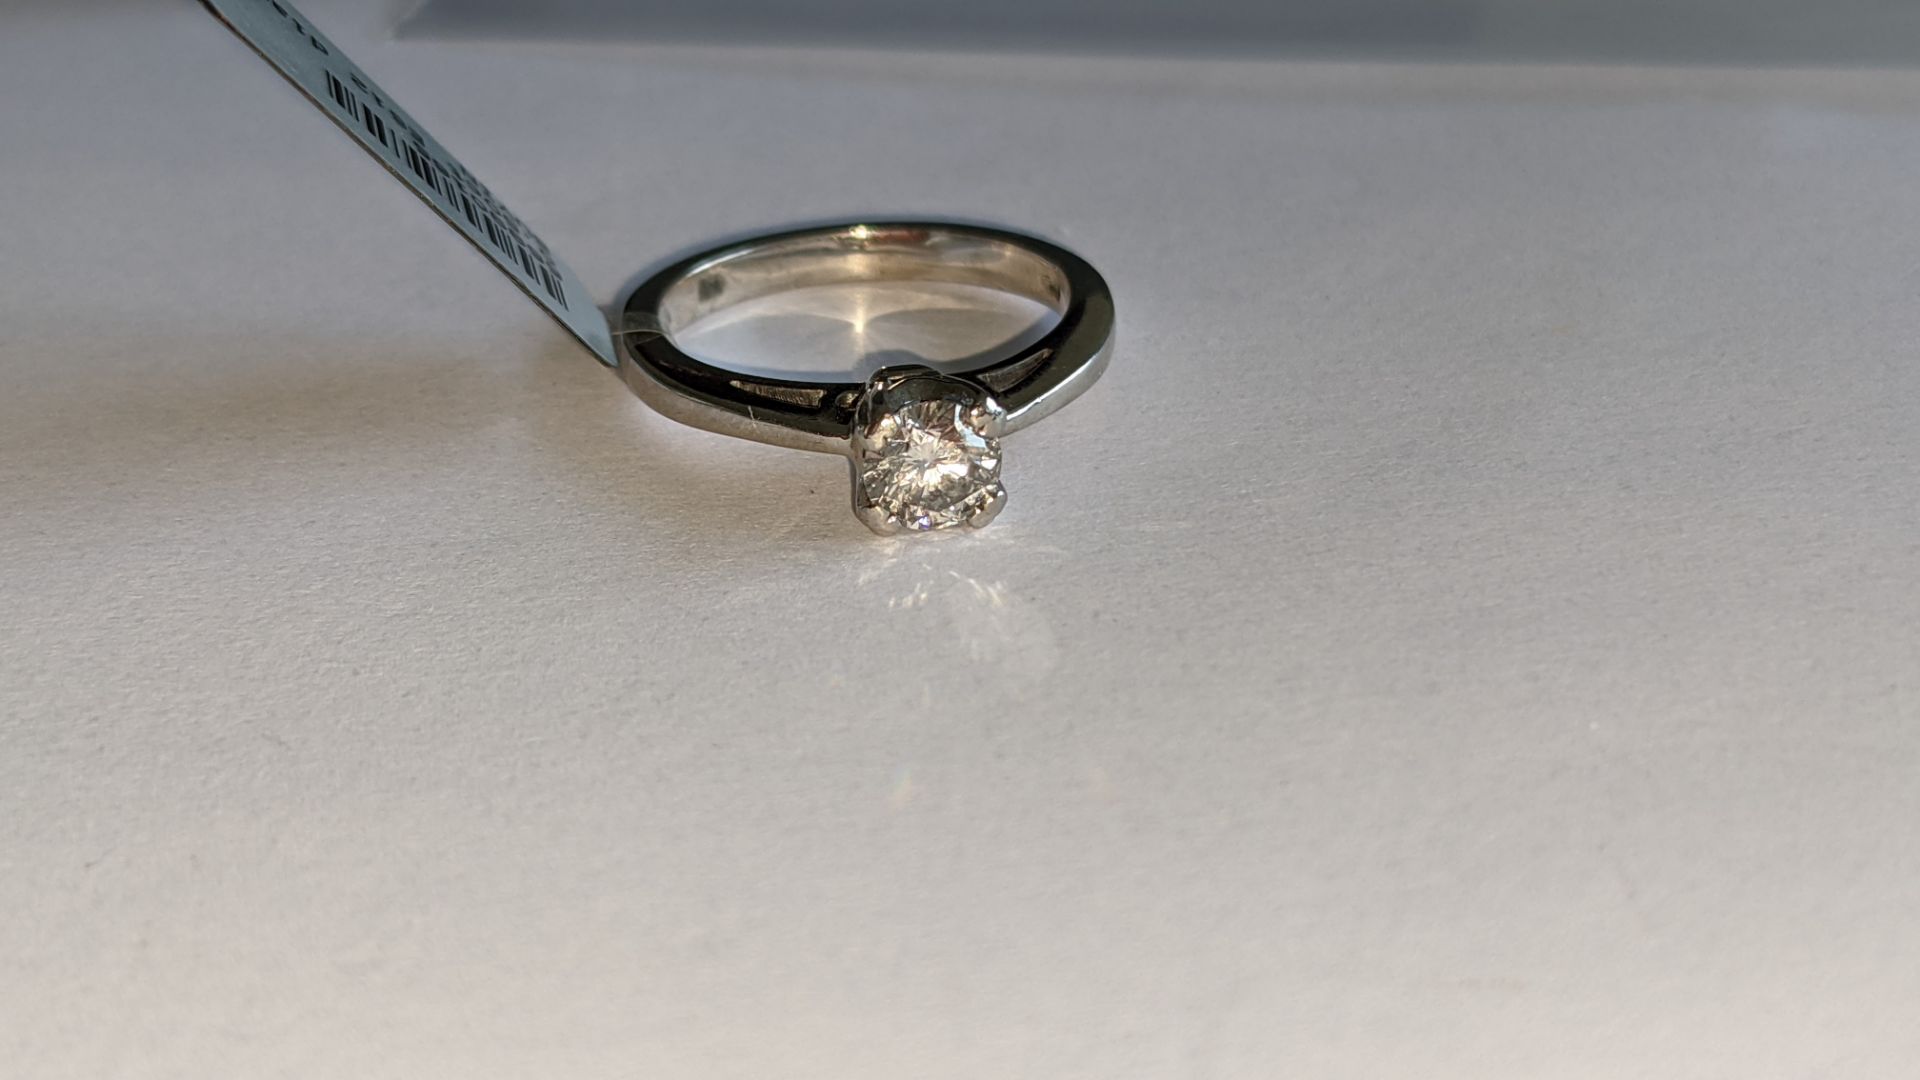 Platinum 950 ring with 0.50ct diamond. Includes diamond report/certification indicating the central - Image 8 of 25